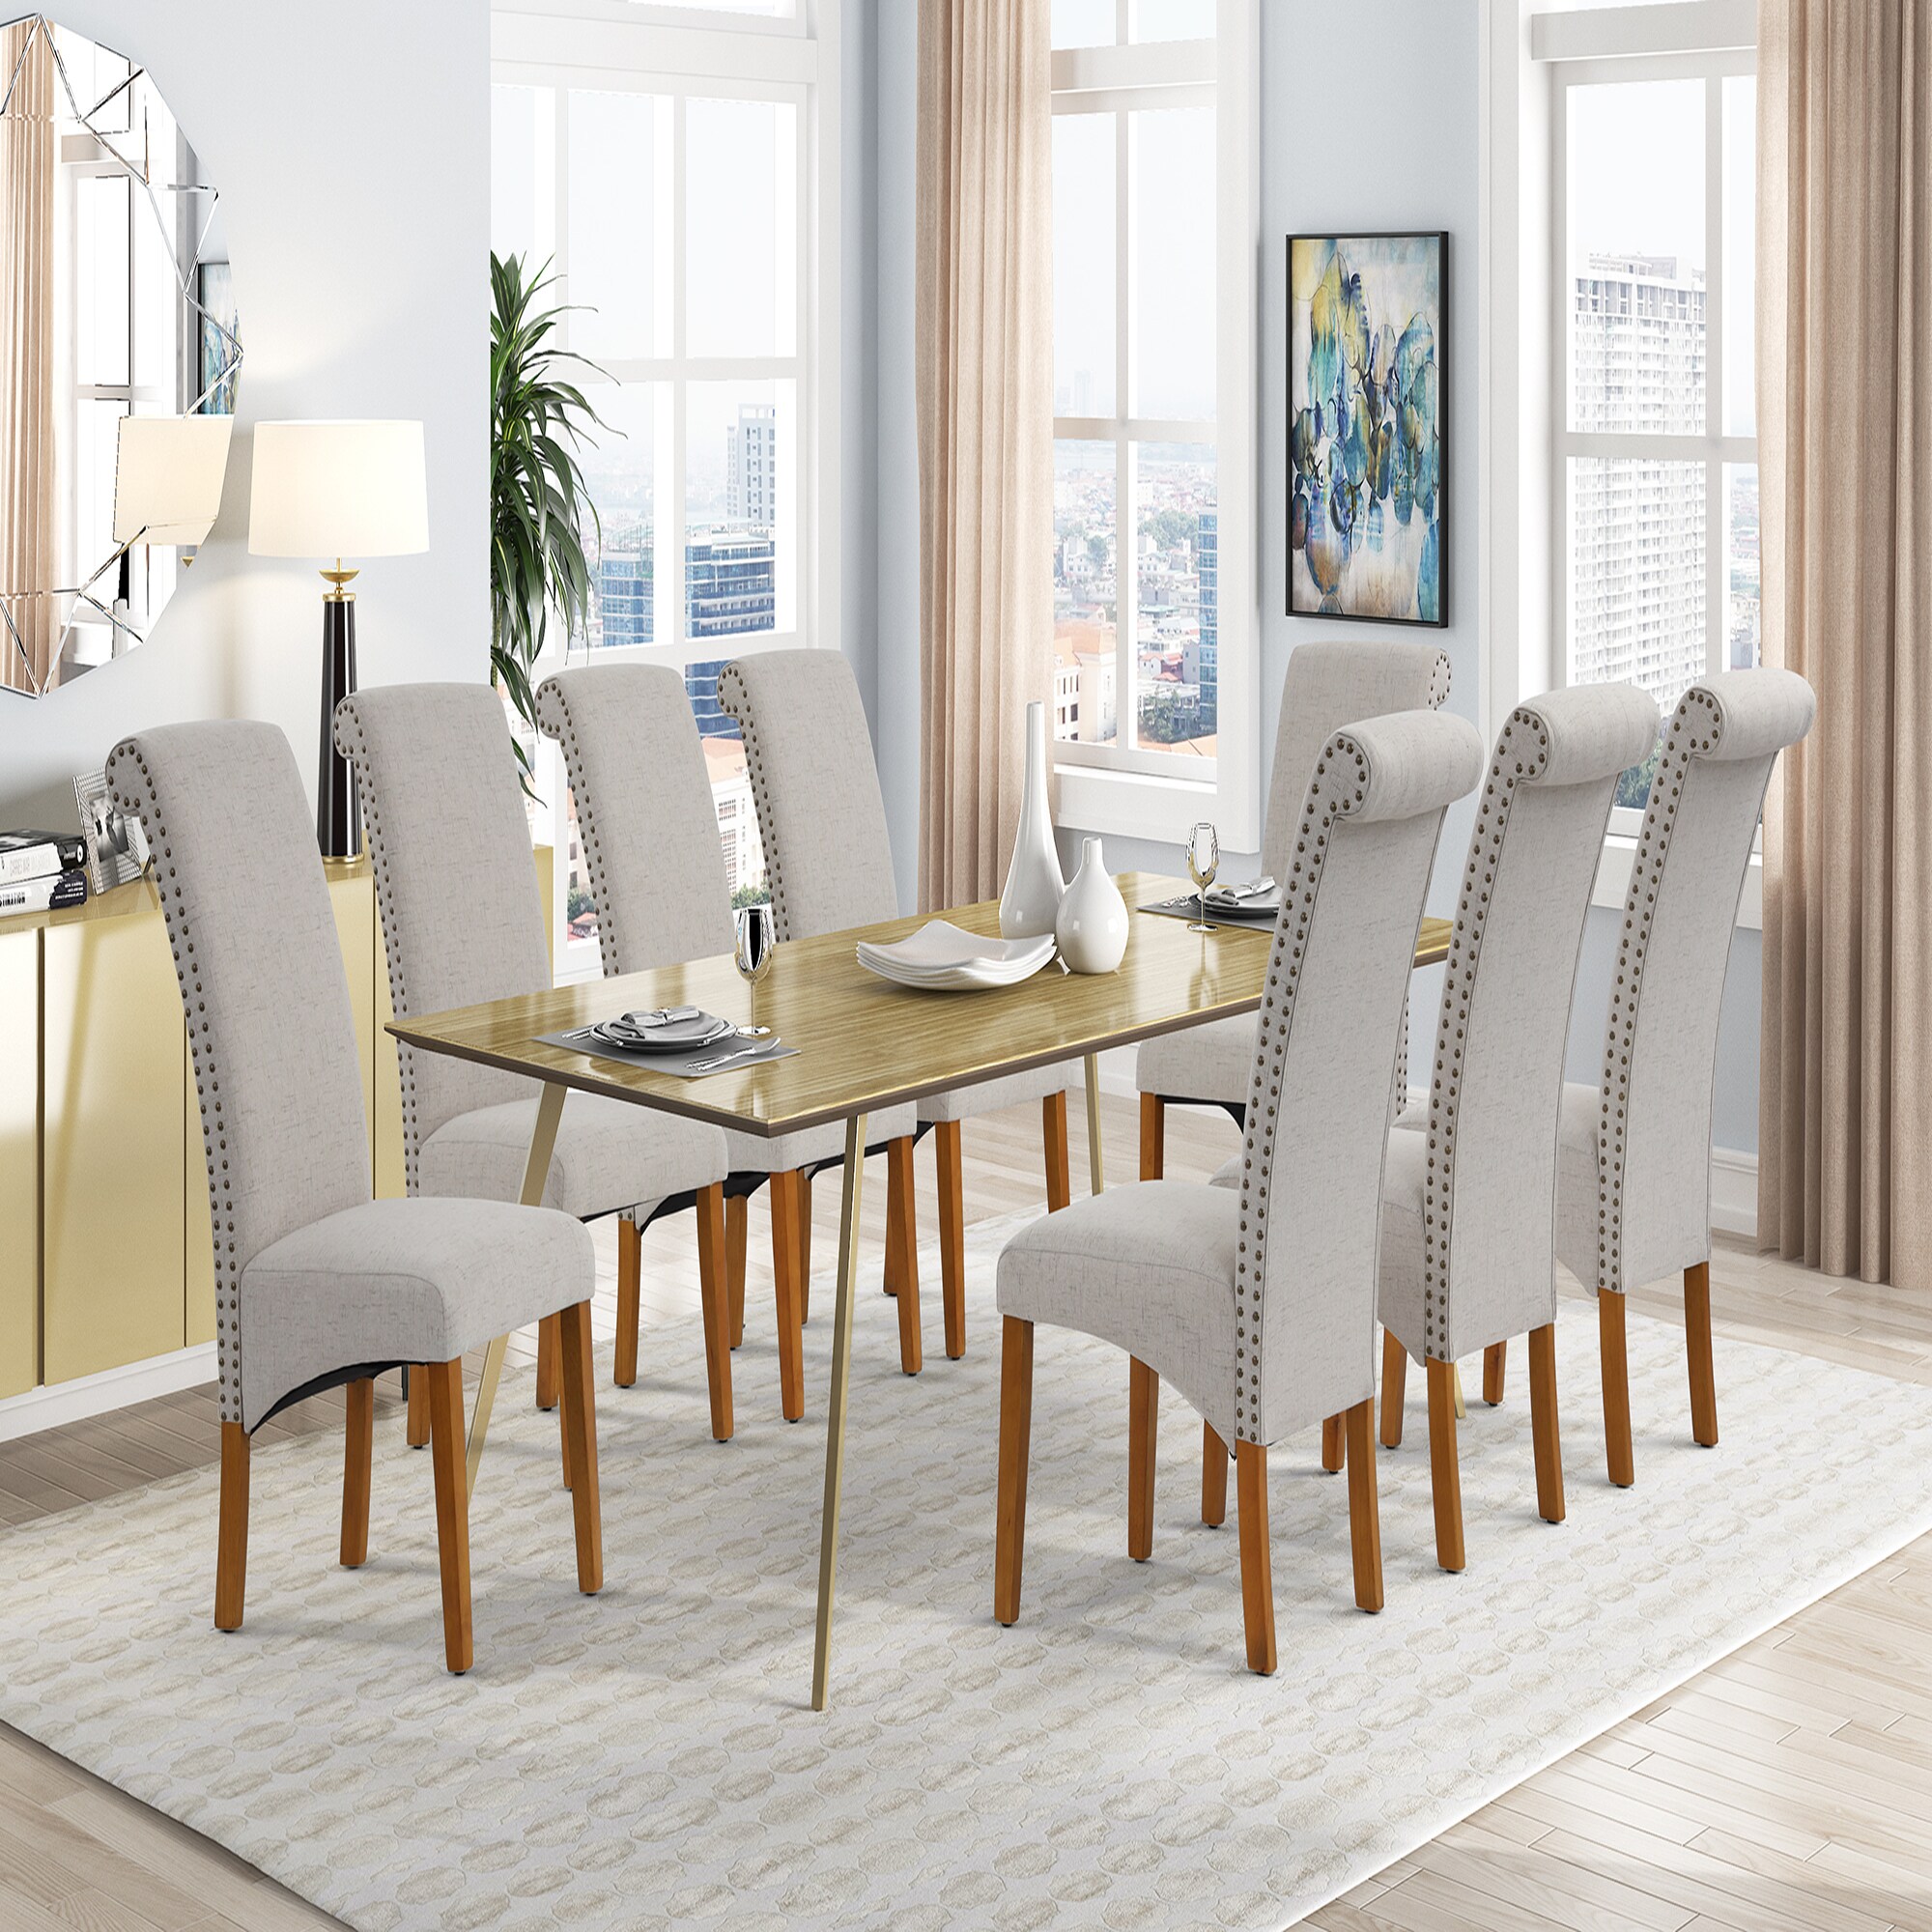 Luis Upholstered Dining Chair Light Brown/Gold (Set of 2)